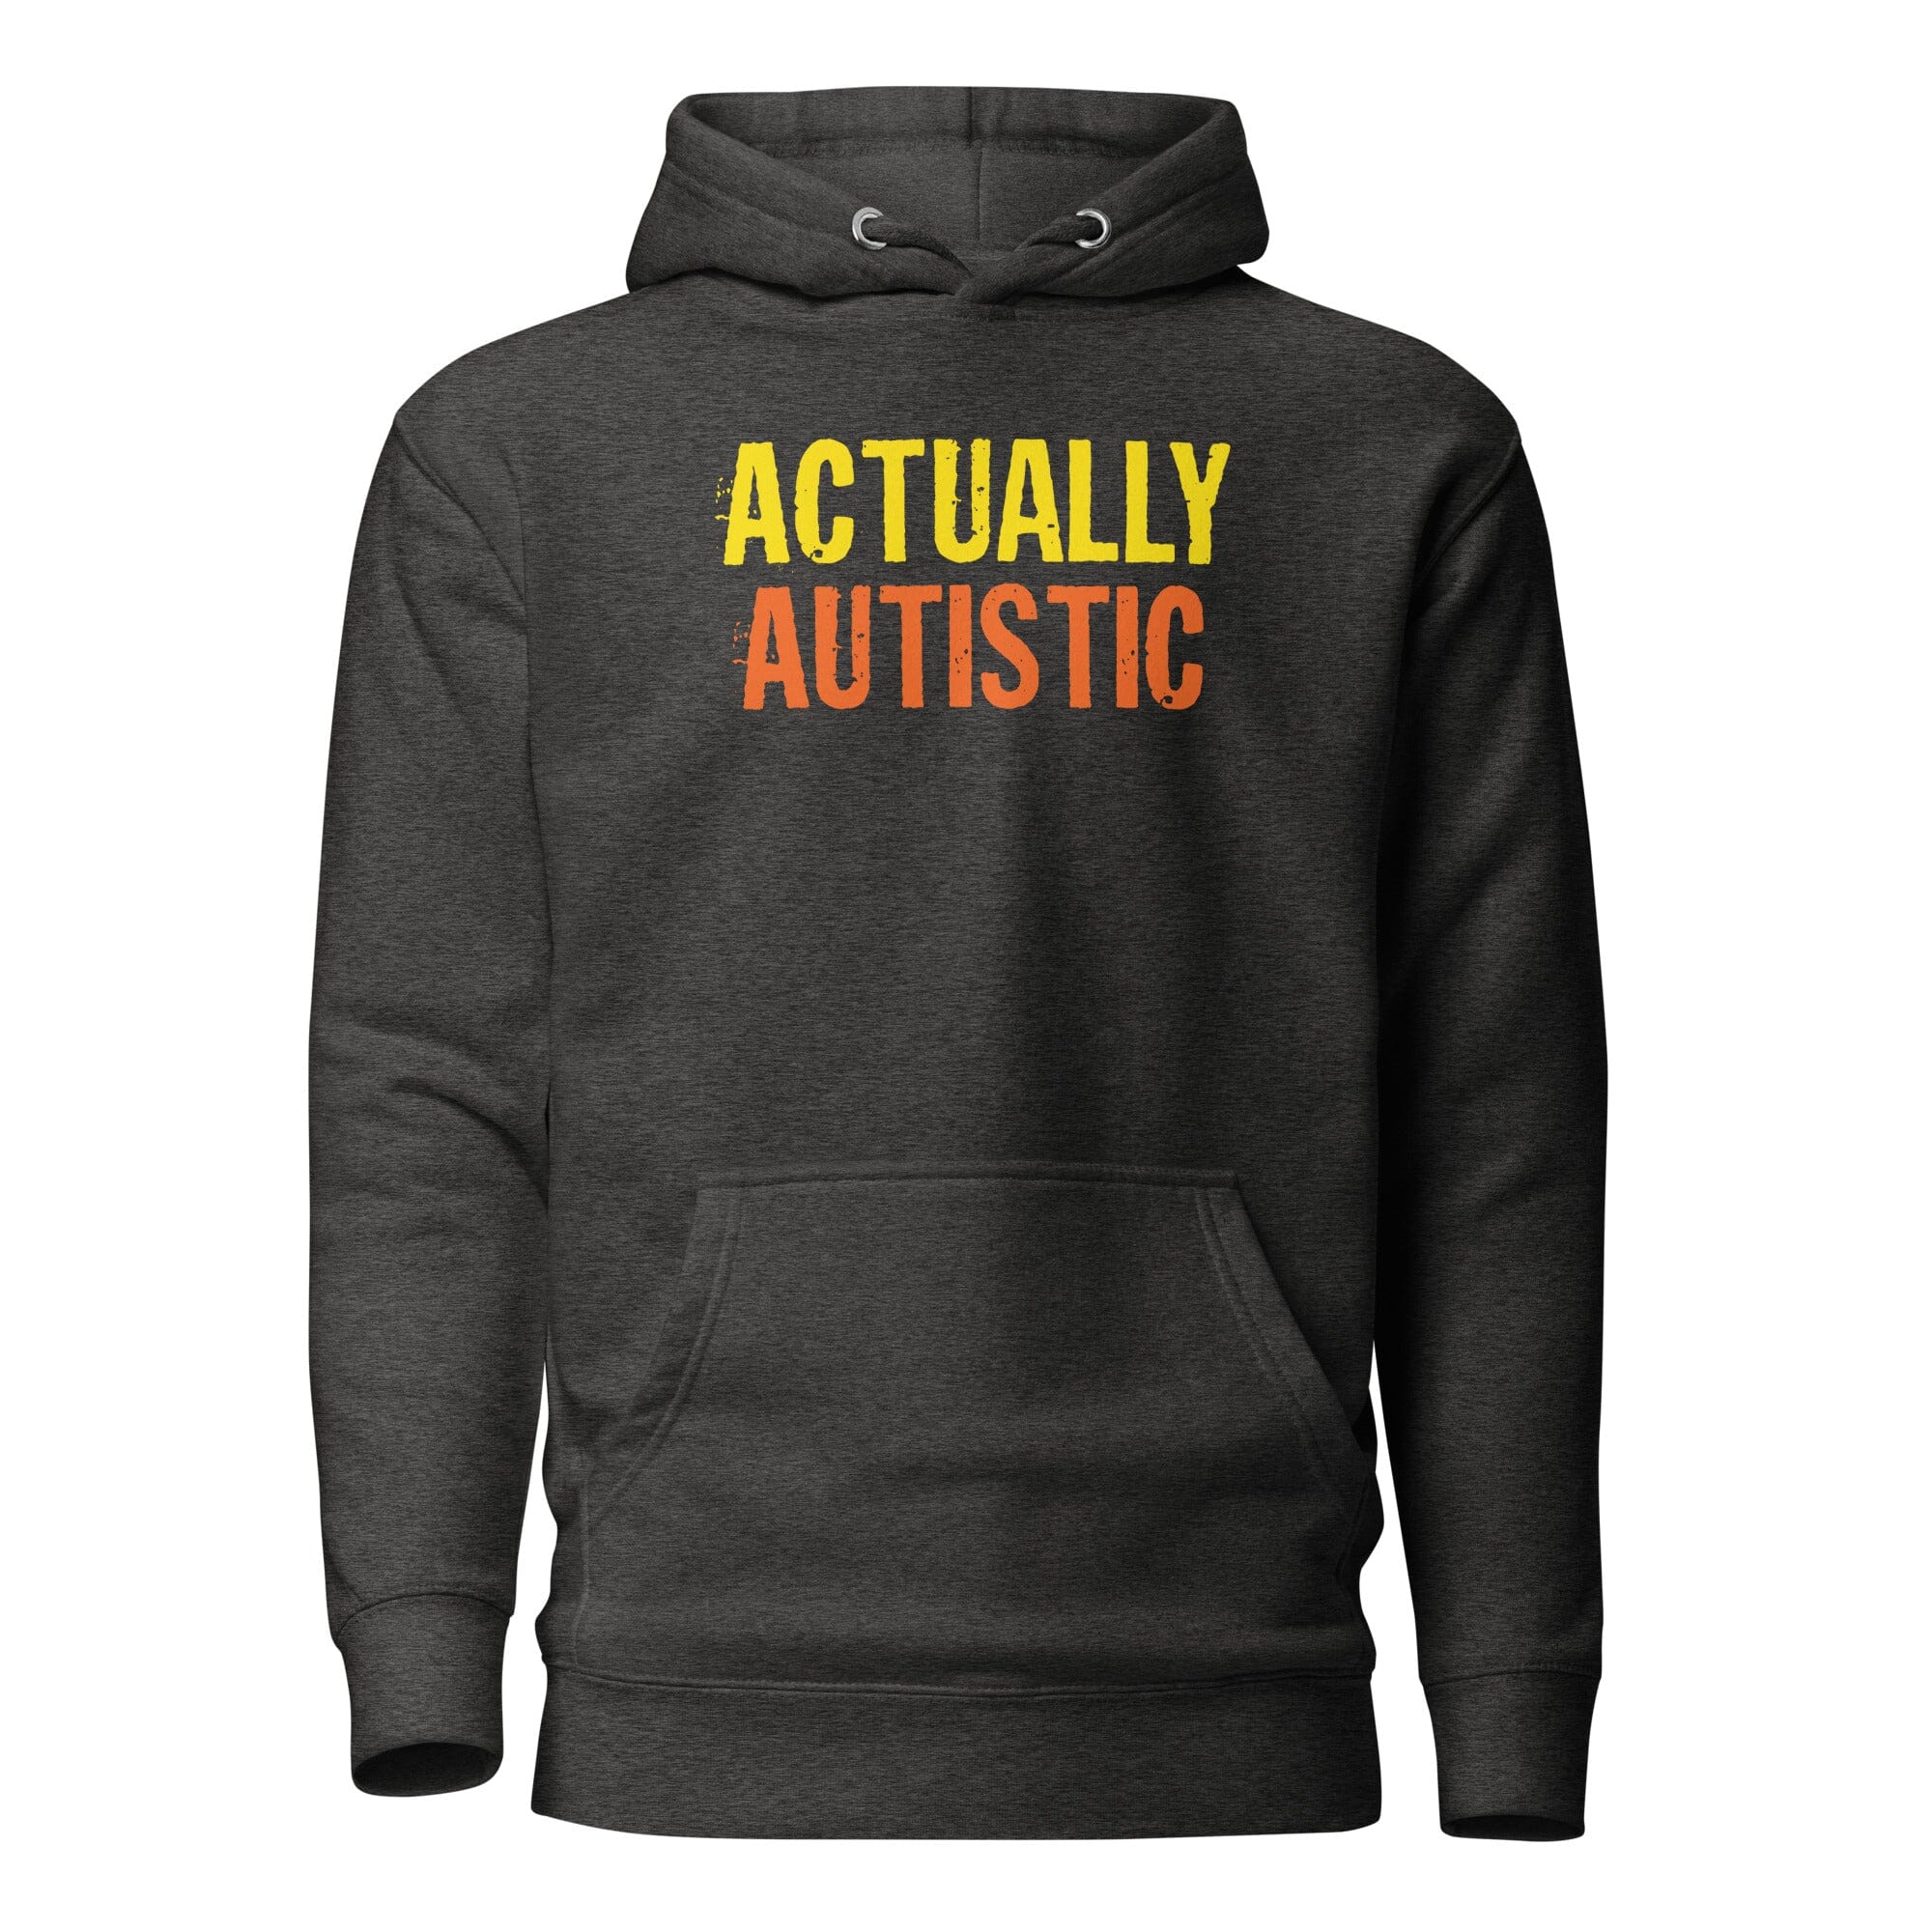 Actually Autistic Unisex Hoodie The Autistic Innovator Charcoal Heather S 